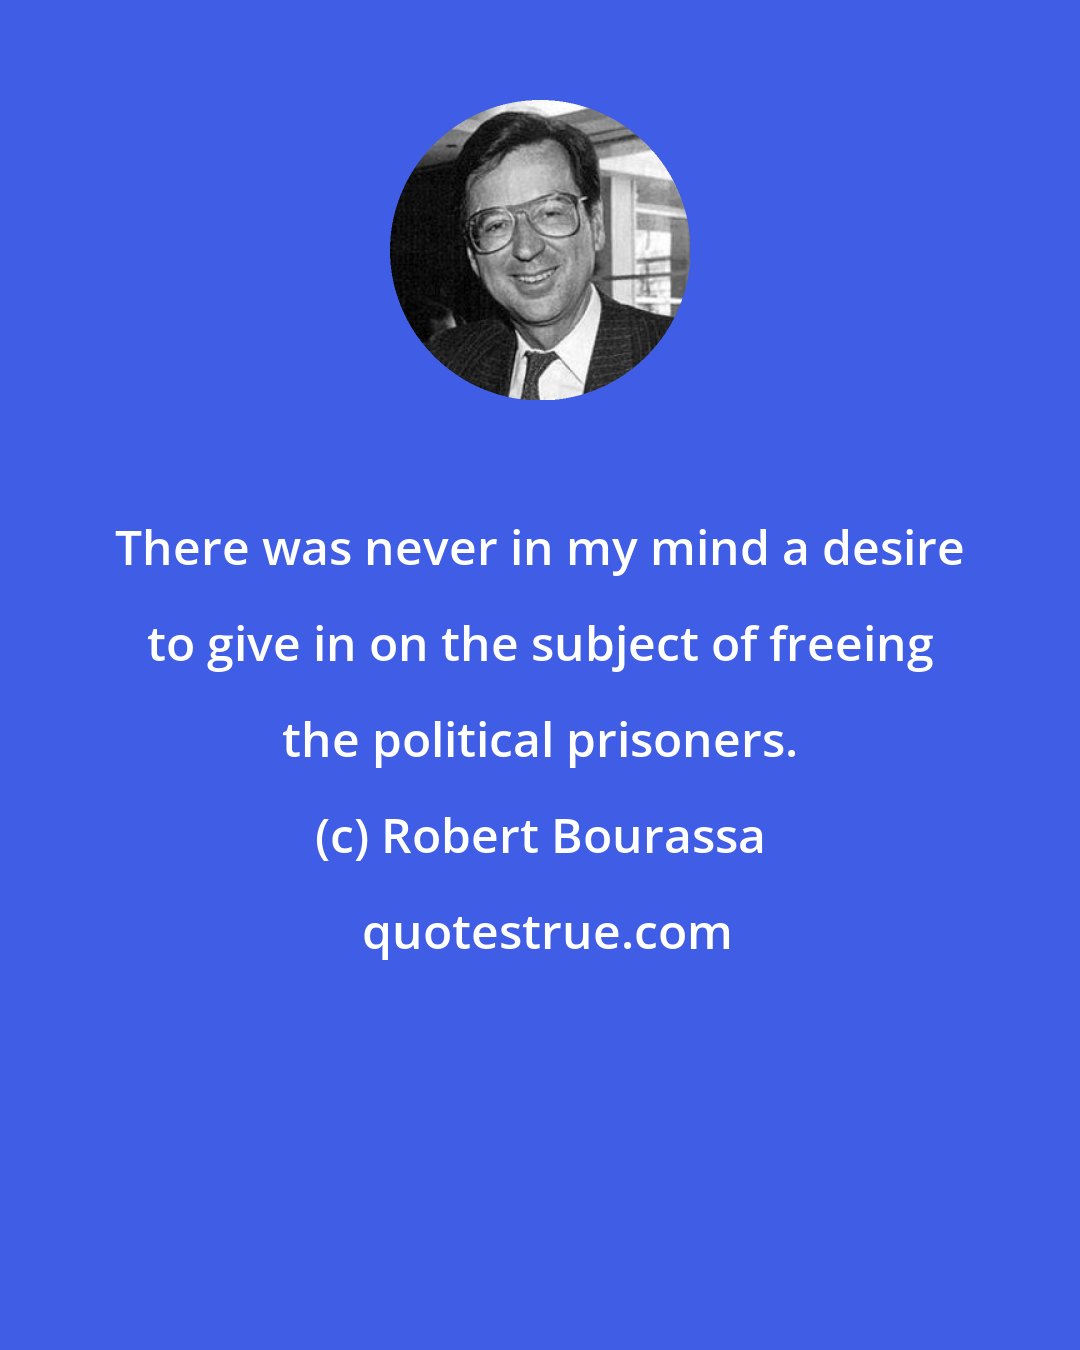 Robert Bourassa: There was never in my mind a desire to give in on the subject of freeing the political prisoners.